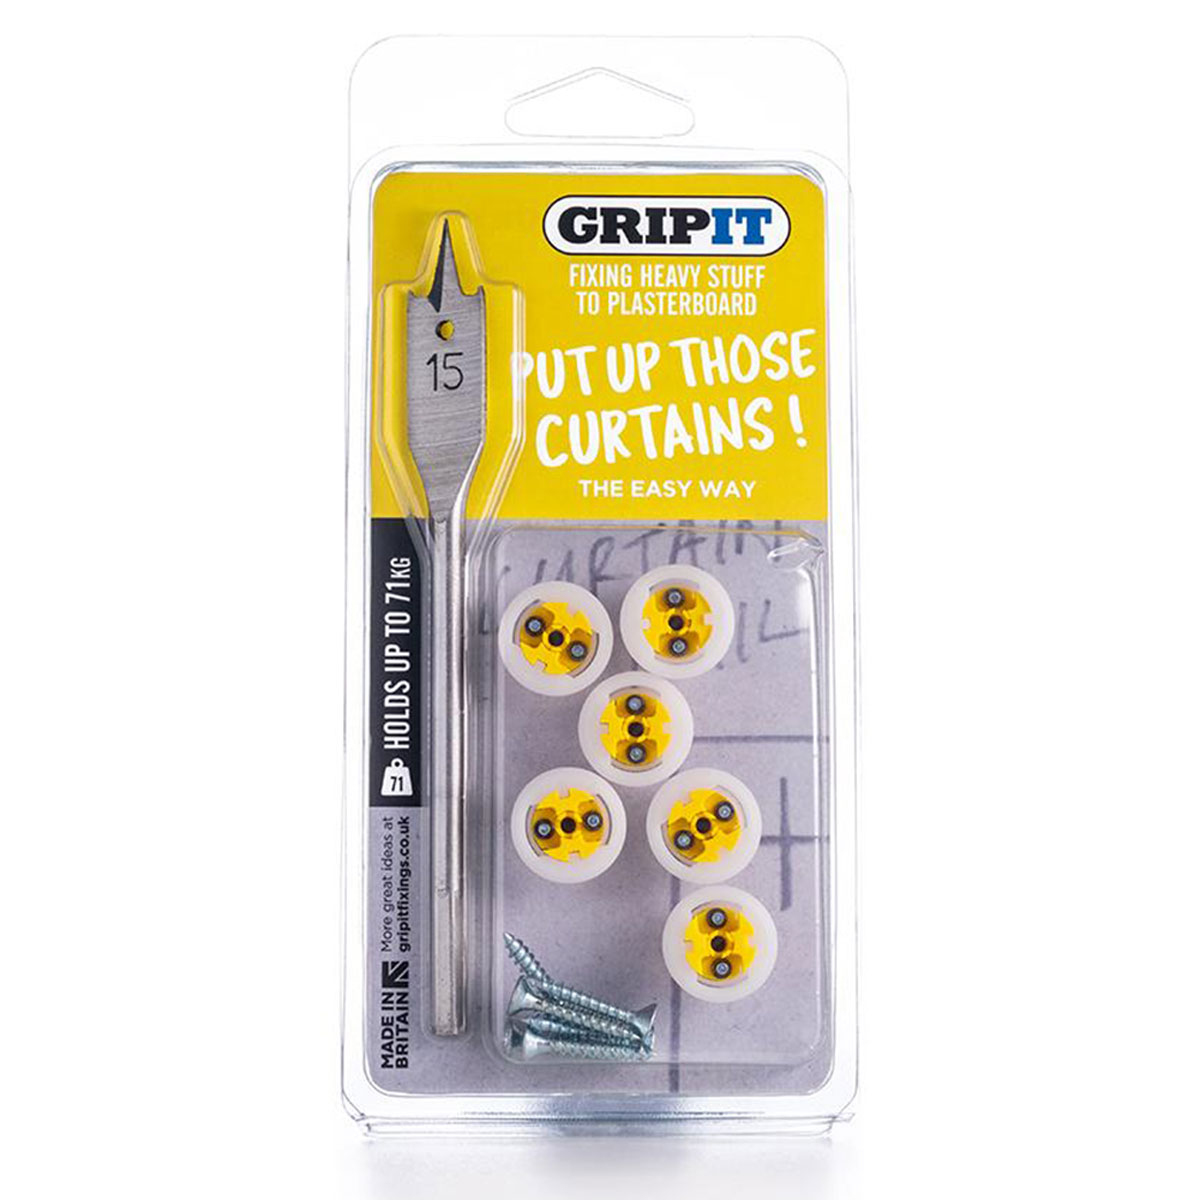 Gripit 15mm Plasterboard Fixing Curtain Kit Yellow Eg Curtains Blinds